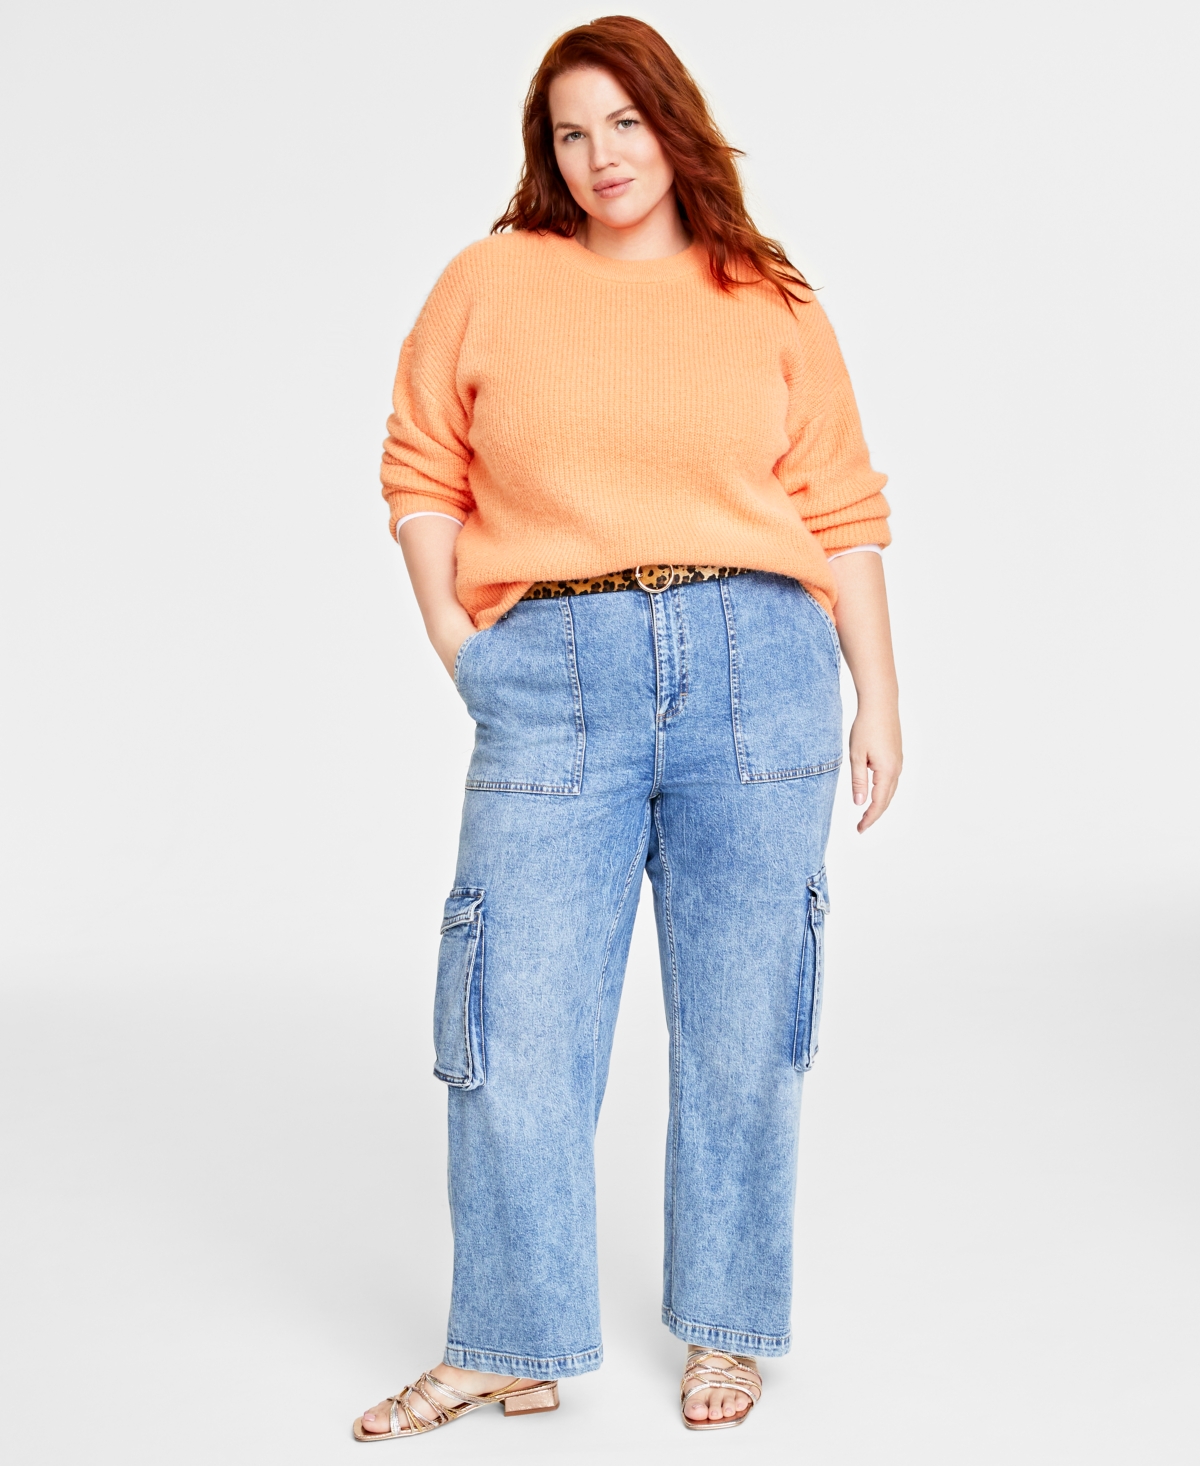 ON 34TH PLUS SIZE CREWNECK LONG-SLEEVE SHAKER SWEATER, CREATED FOR MACY'S